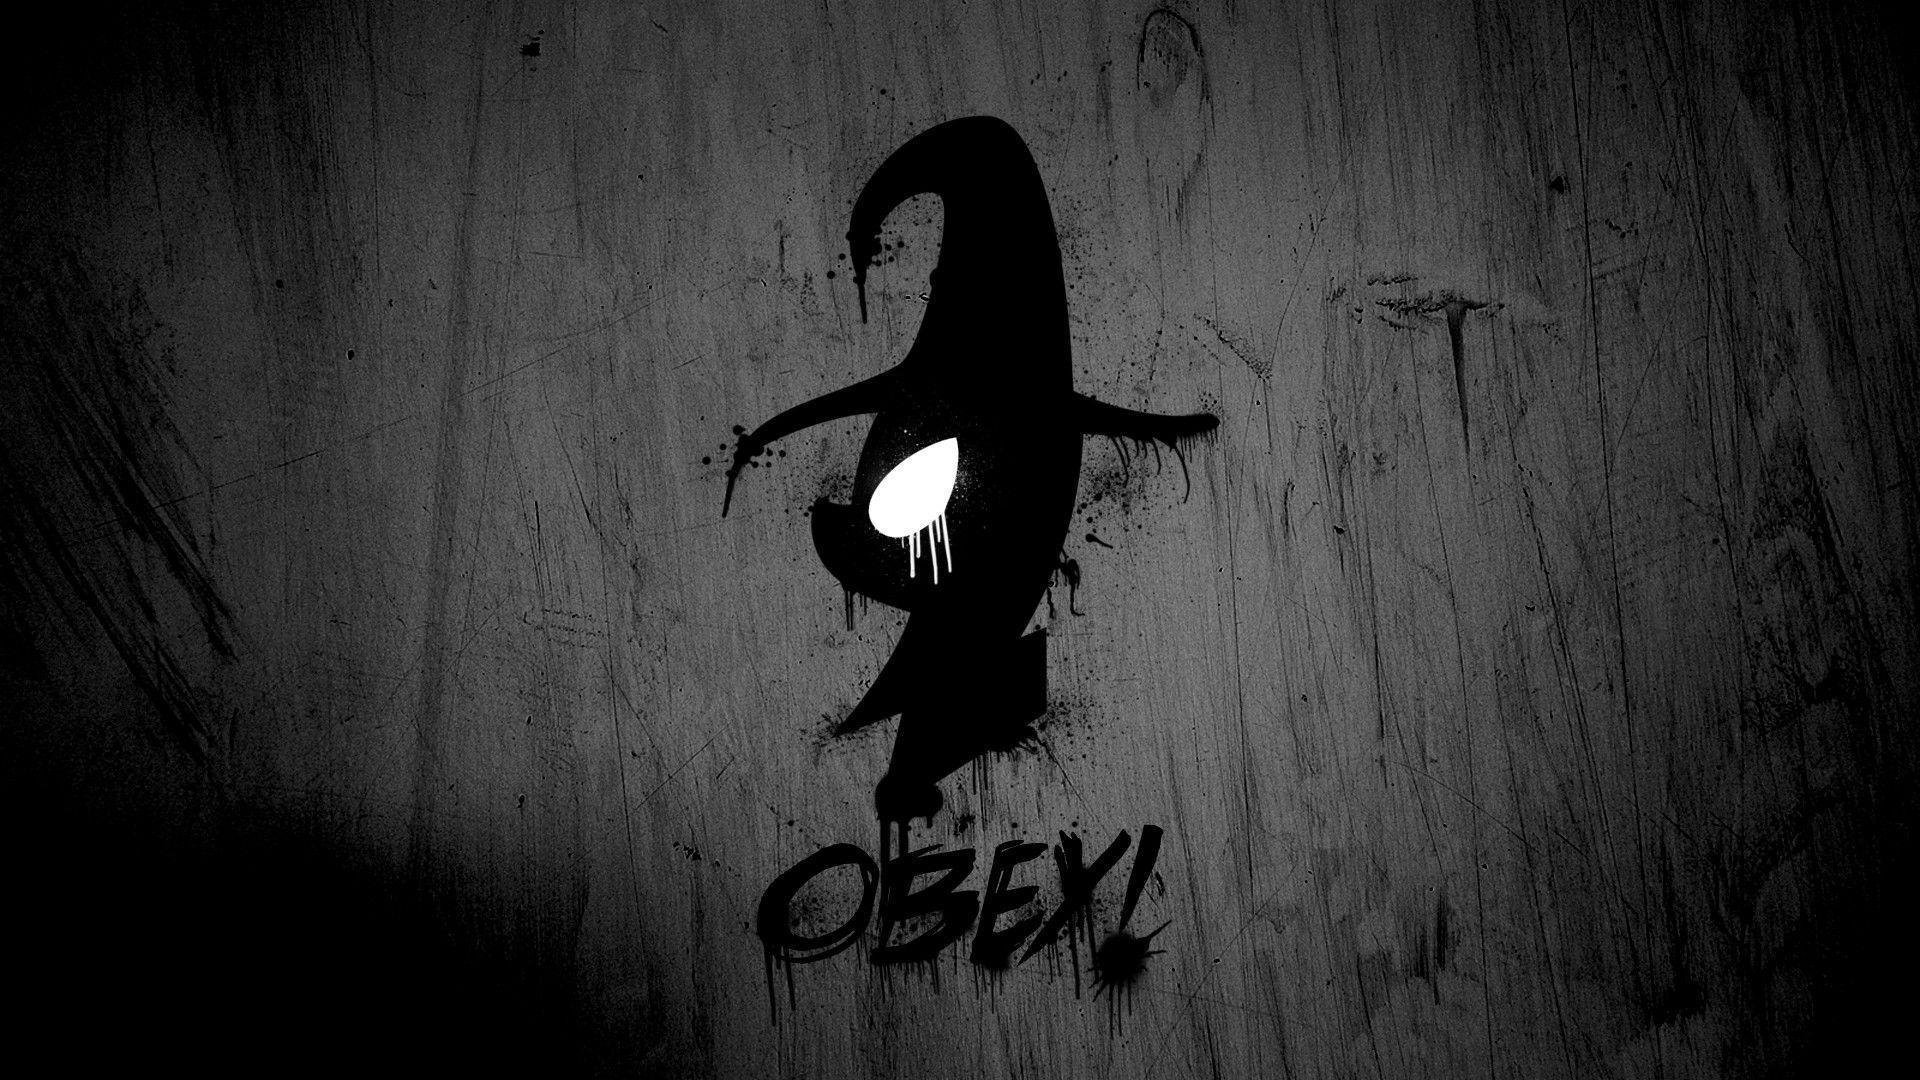 Obey wallpapers